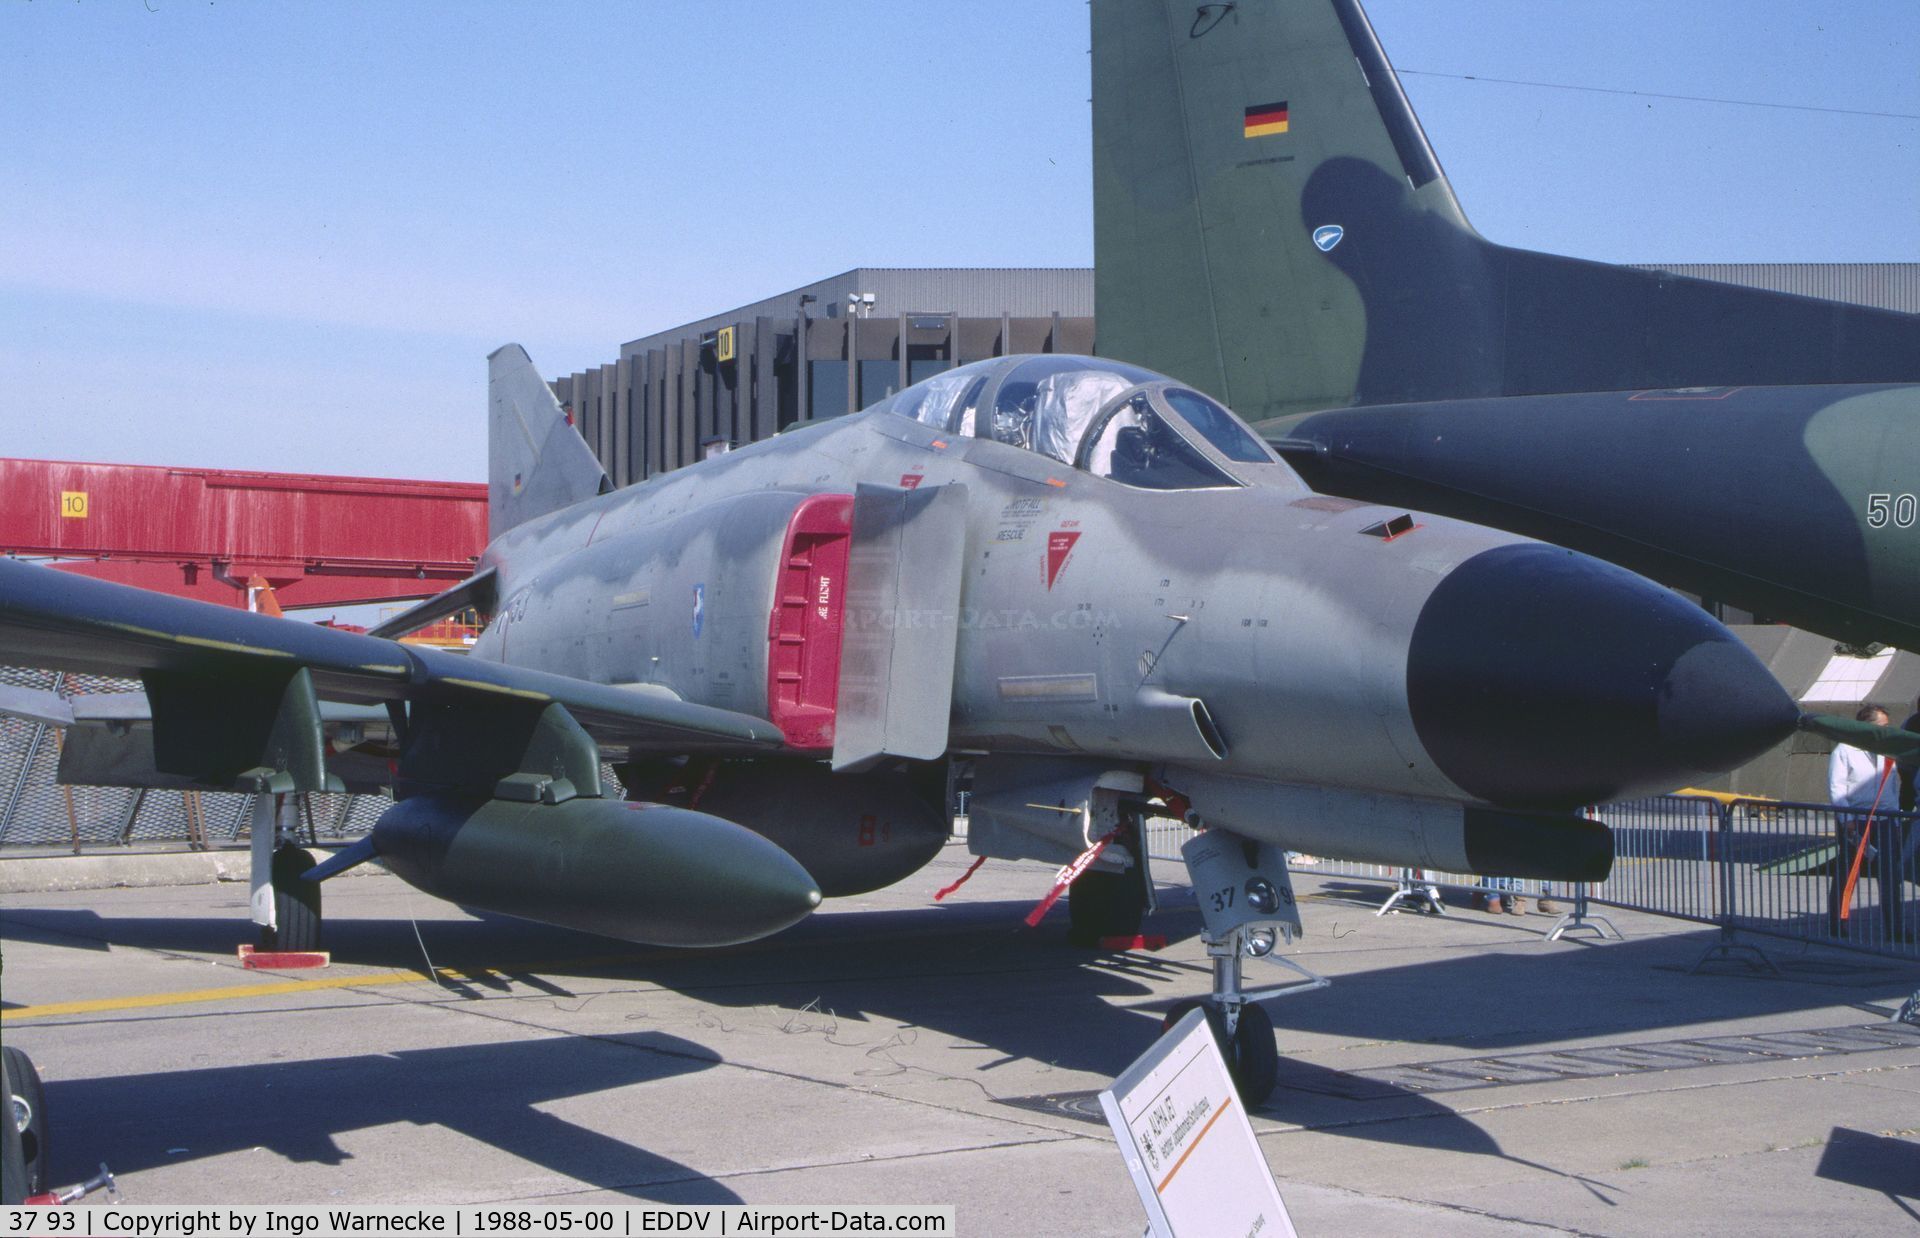 37 93, McDonnell Douglas F-4F Phantom II C/N 4583, McDonnell Douglas F-4F Phantom II of the Luftwaffe (German Air Force) in experimental camouflage at the Internationale Luftfahrtausstellung ILA, Hannover 1988